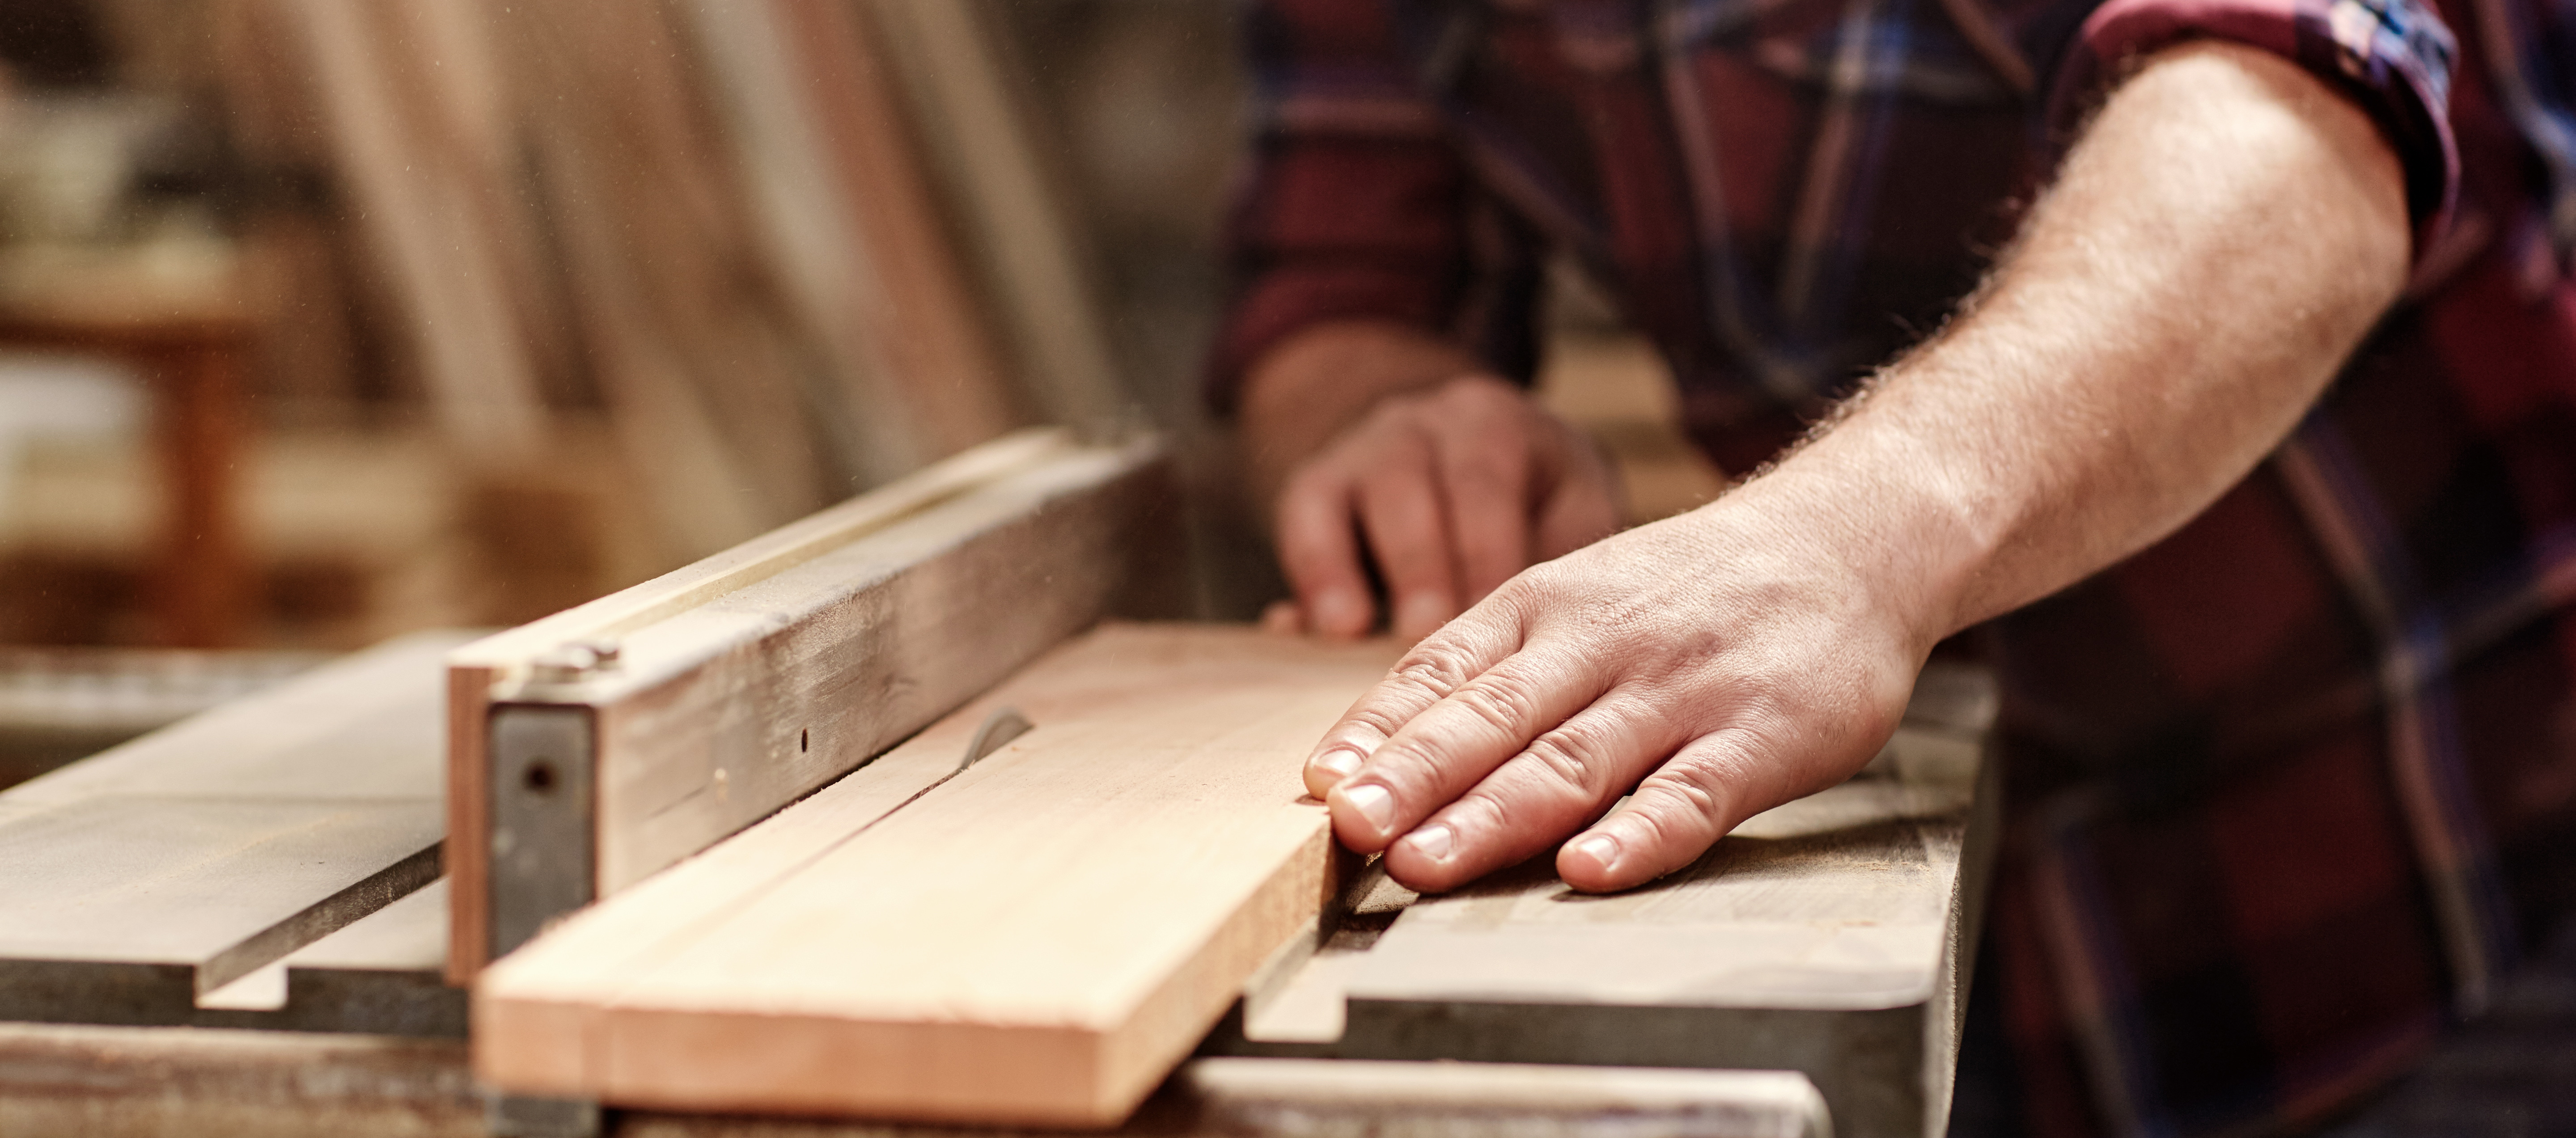 Sawn and Treated Timber – Everything You Need to Know.